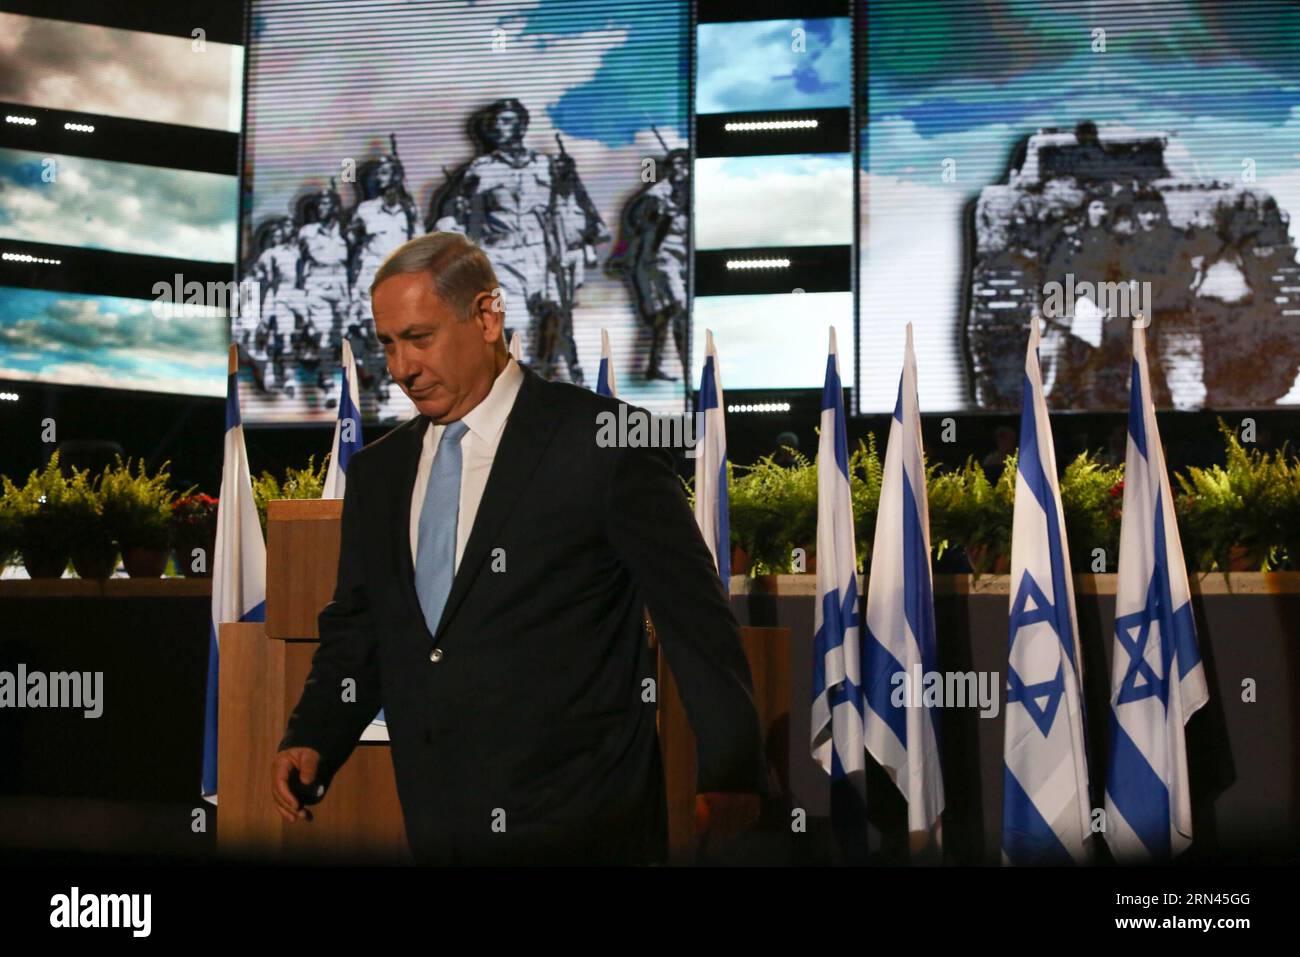 (150507) -- JERUSALEM, May 7, 2015 -- Israeli Prime Minister Benjamin Netanyahu attends a ceremony honoring World War II veterans and marking the 70th anniversary of the Allied victory over Nazi Germany at the Armored Corps Memorial and Museum at Latrun Junction near Jerusalem, on May 7, 2015. ) MIDEAST-LATRUN-WWII-ALLIED VICTORY-THE 70TH ANNIVERSARY JINI/GilxYohanan PUBLICATIONxNOTxINxCHN   Jerusalem May 7 2015 Israeli Prime Ministers Benjamin Netanyahu Attends a Ceremony honoring World was II Veterans and marking The 70th Anniversary of The ALLIED Victory Over Nazi Germany AT The Armored Cor Stock Photo